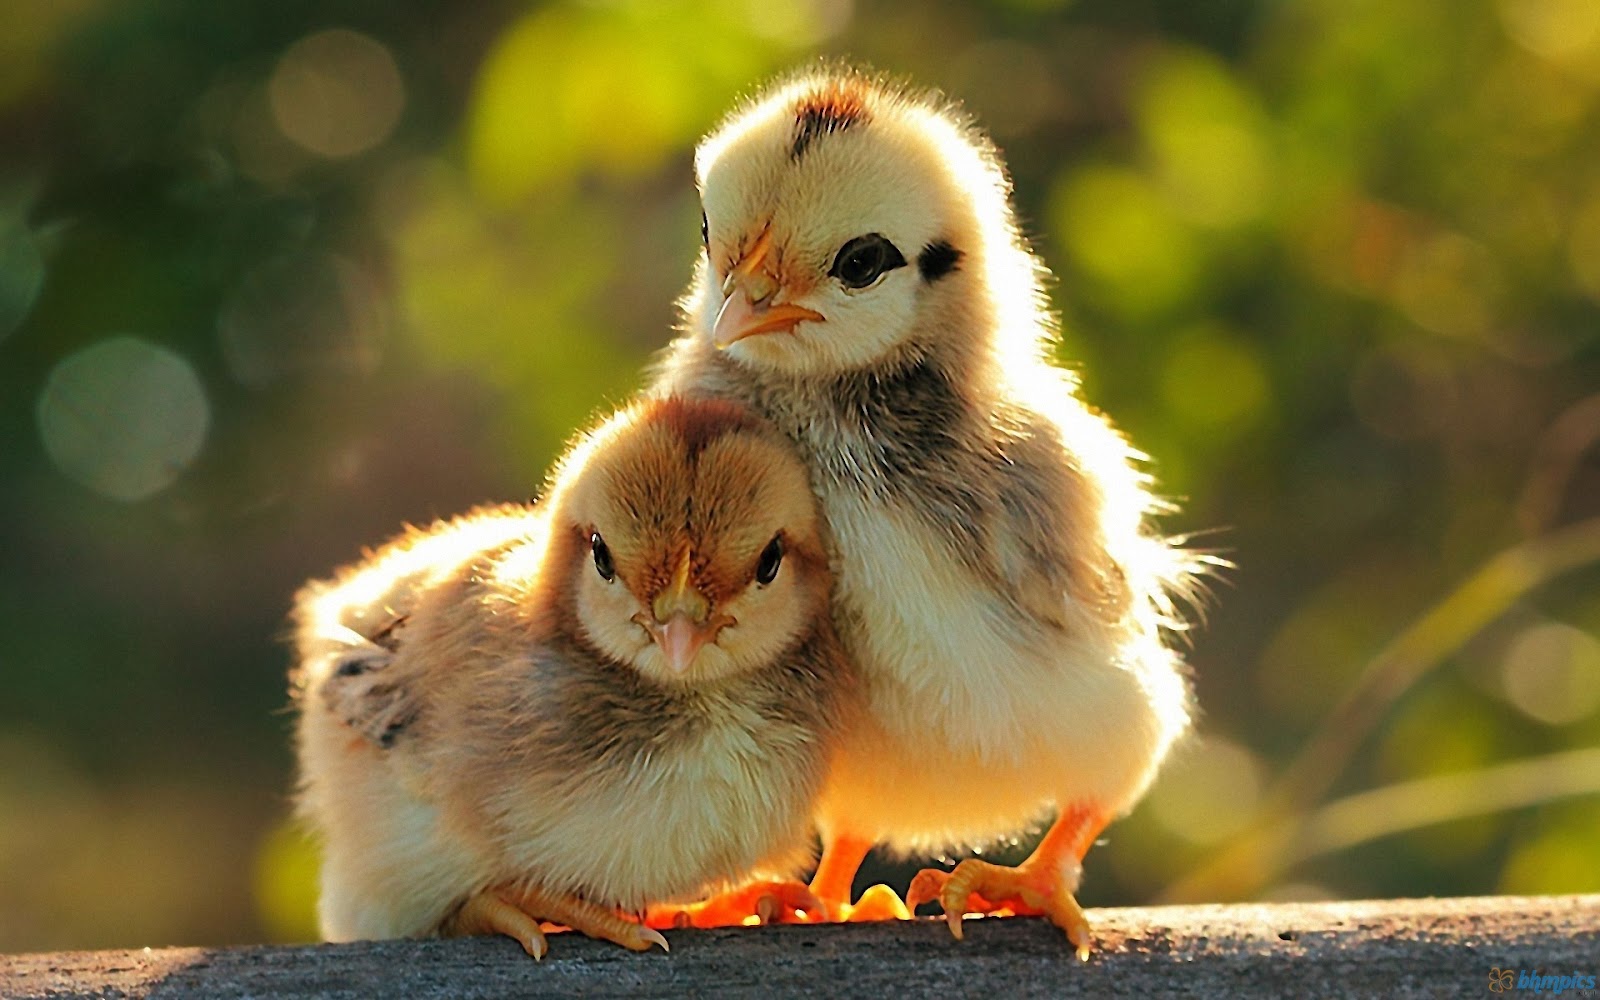 Wallpaper Two Chickens Baby For Desktop Pc